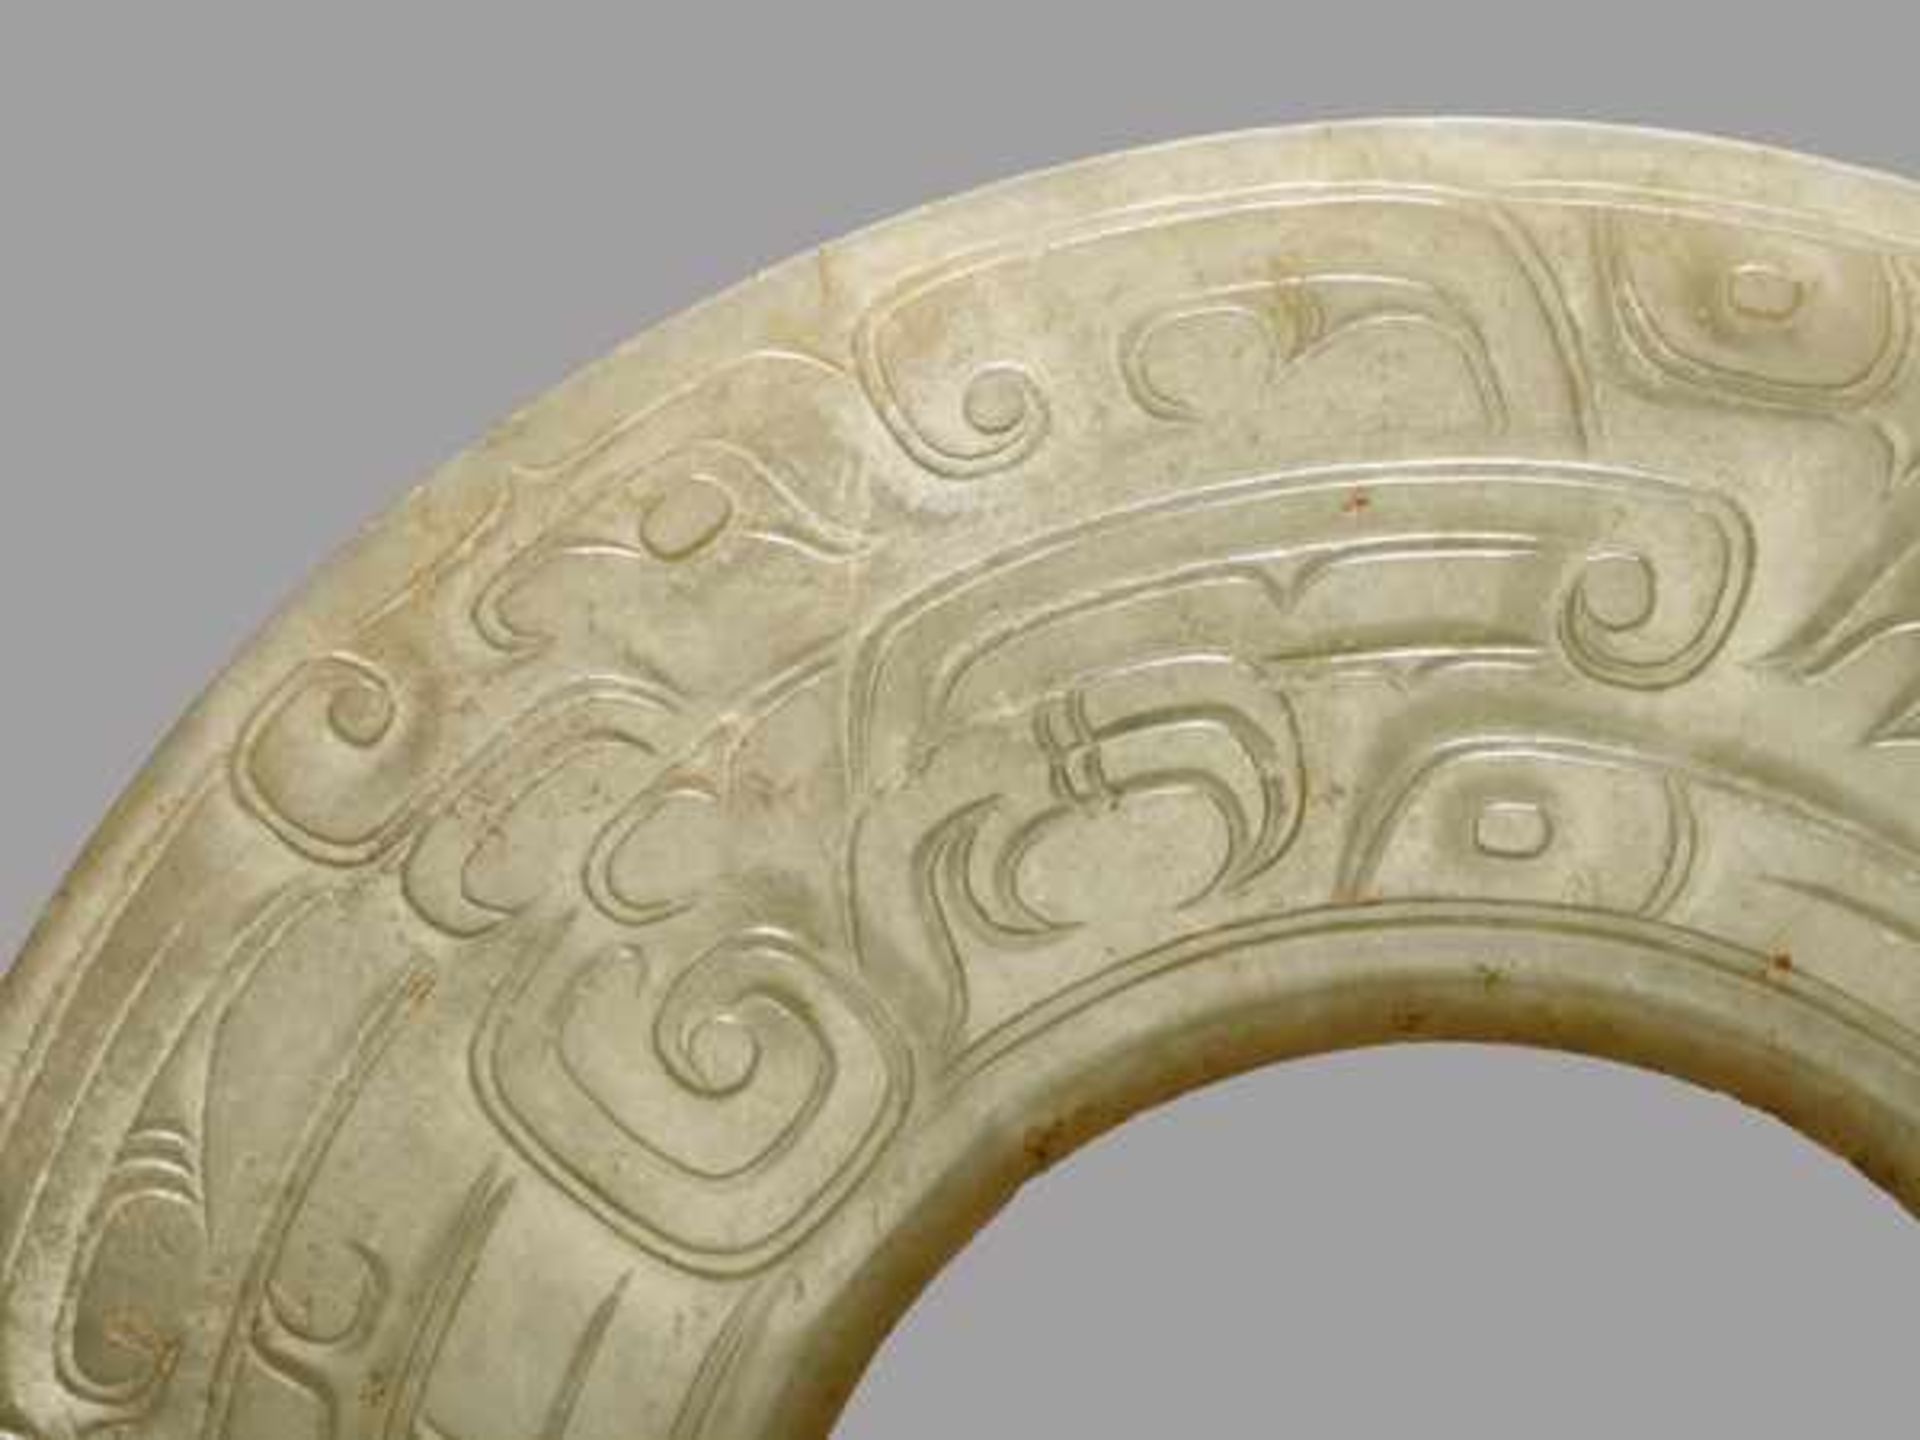 A LARGE DISC IN LIGHT GREEN JADE WITH A DOUBLE ONELEGGED DRAGON (KUI) DESIGN Jade, China. Late - Image 3 of 6